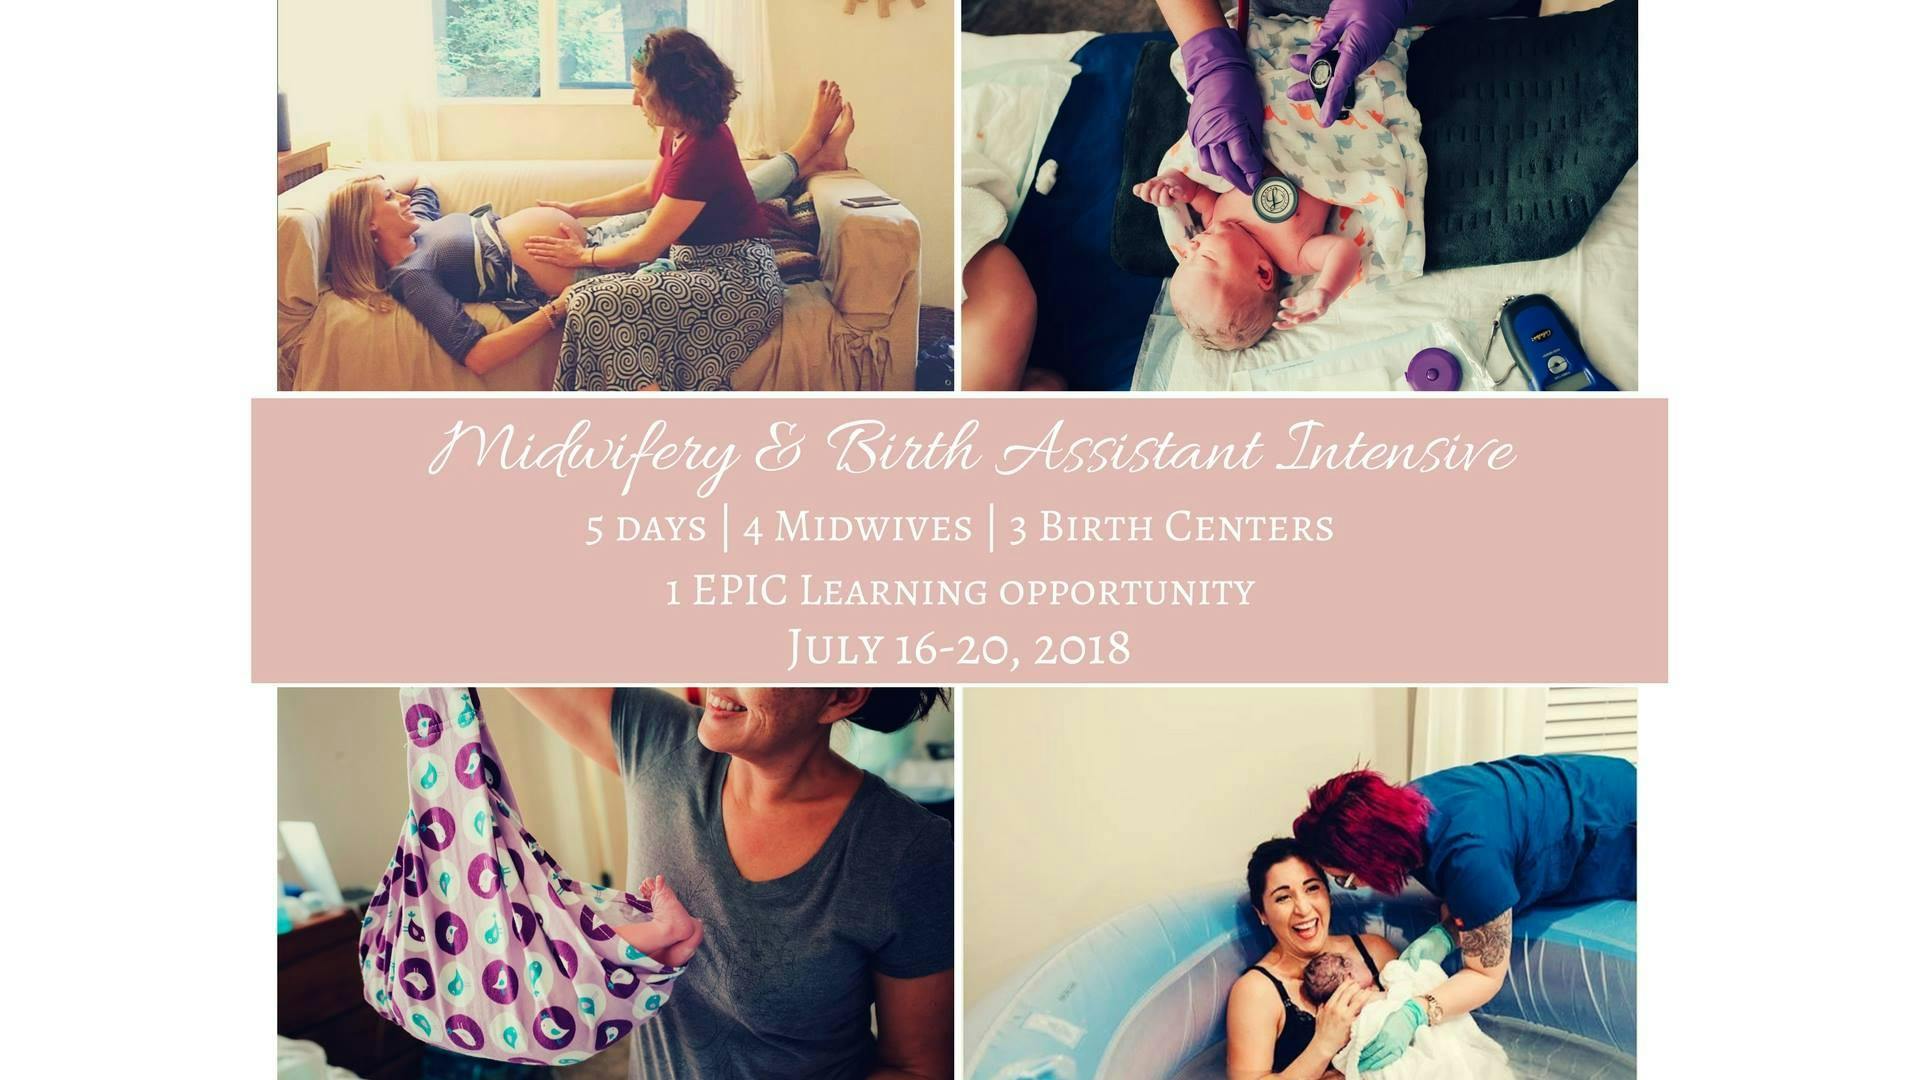 Midwifery & Birth Assistant Intensive